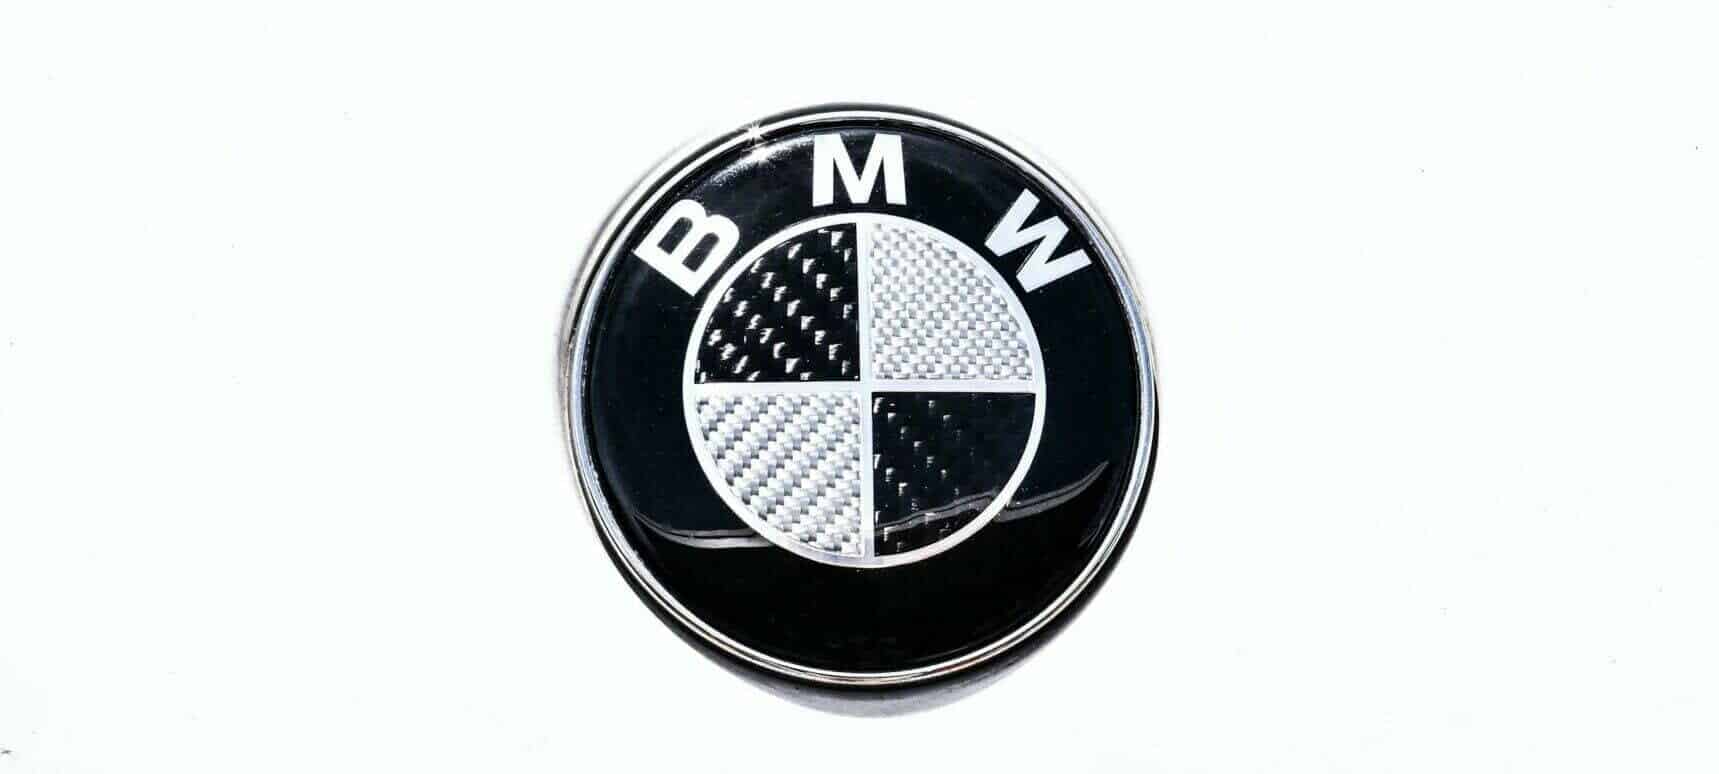 What do you know about the BMW car brand?